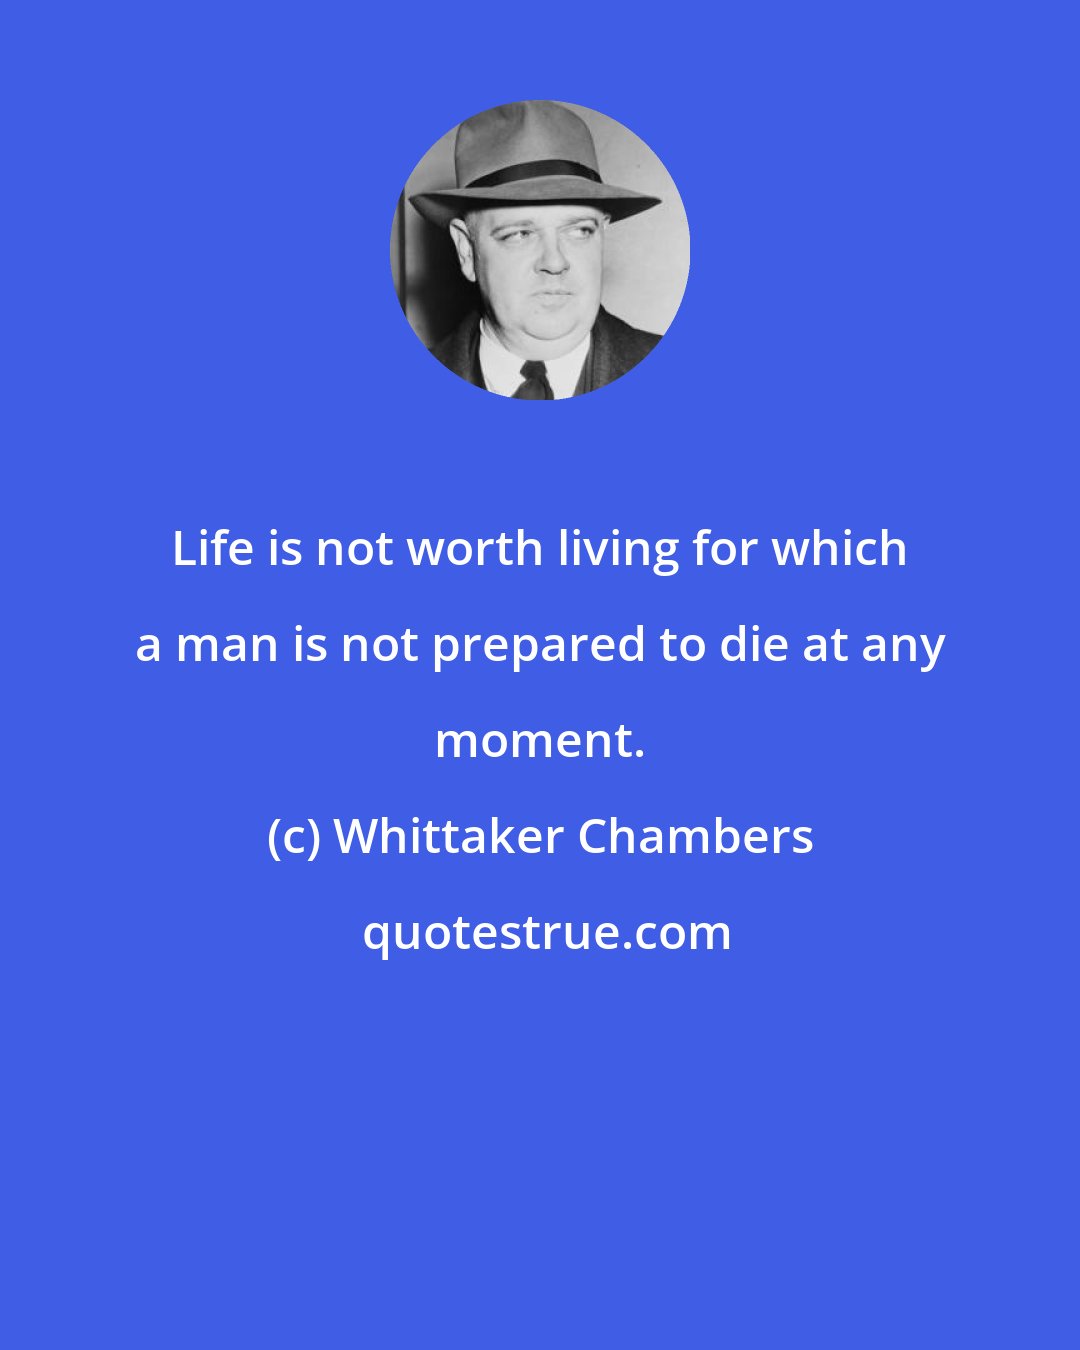 Whittaker Chambers: Life is not worth living for which a man is not prepared to die at any moment.